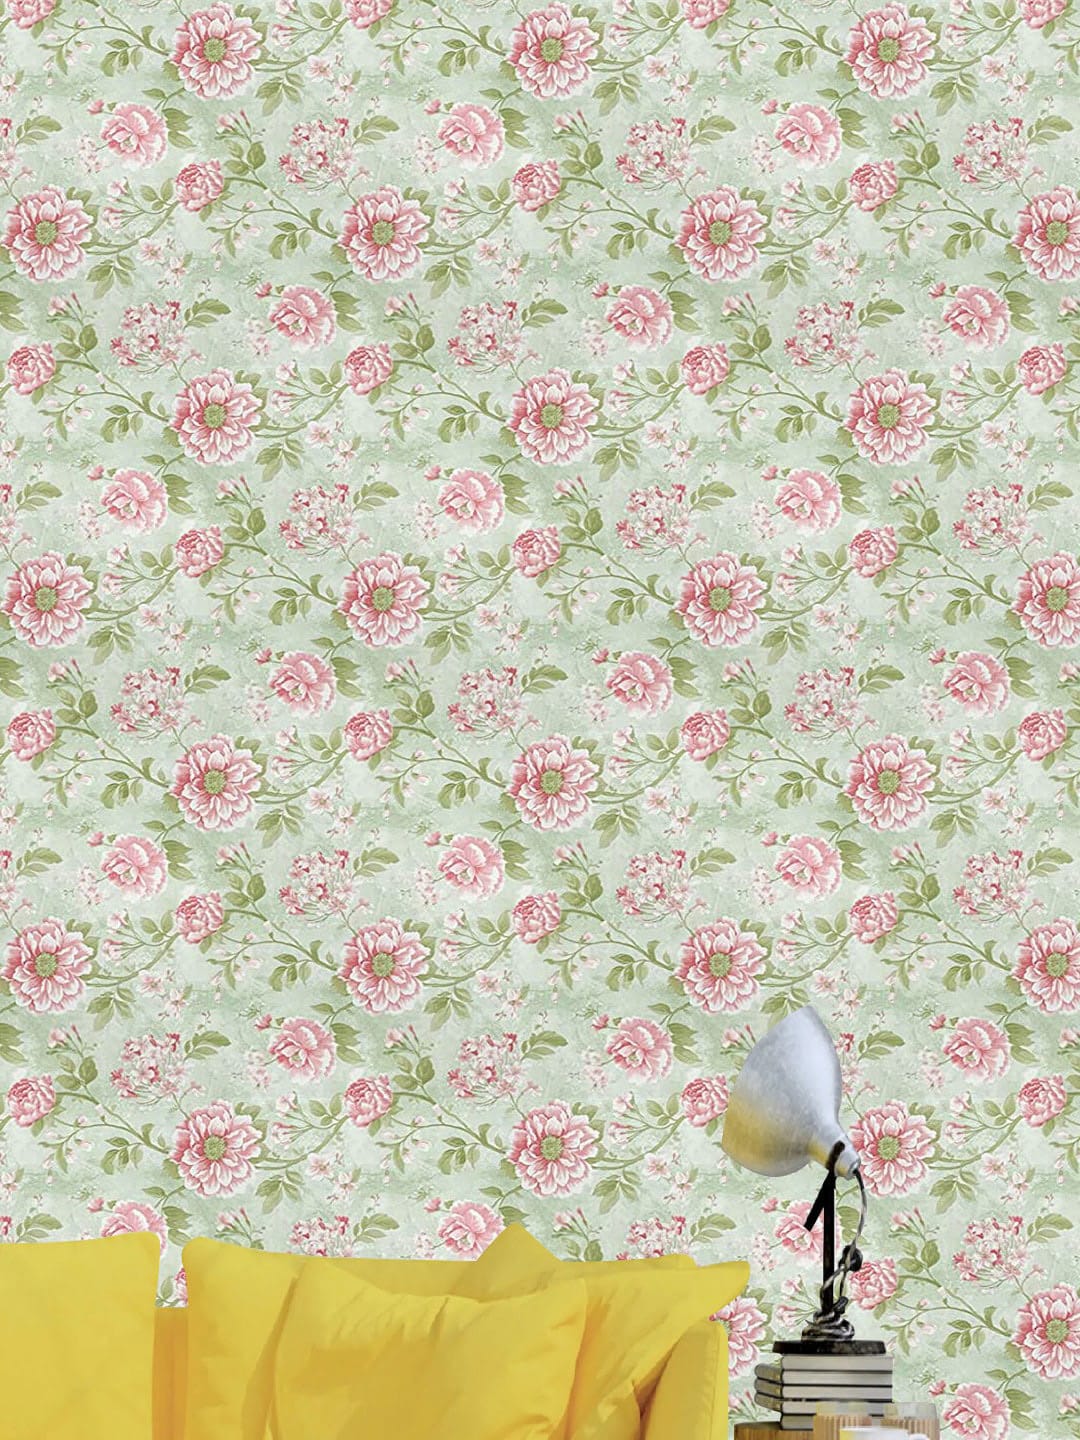 Jaamso Royals Multicoloured Flower & Leaves Wallpaper Price in India